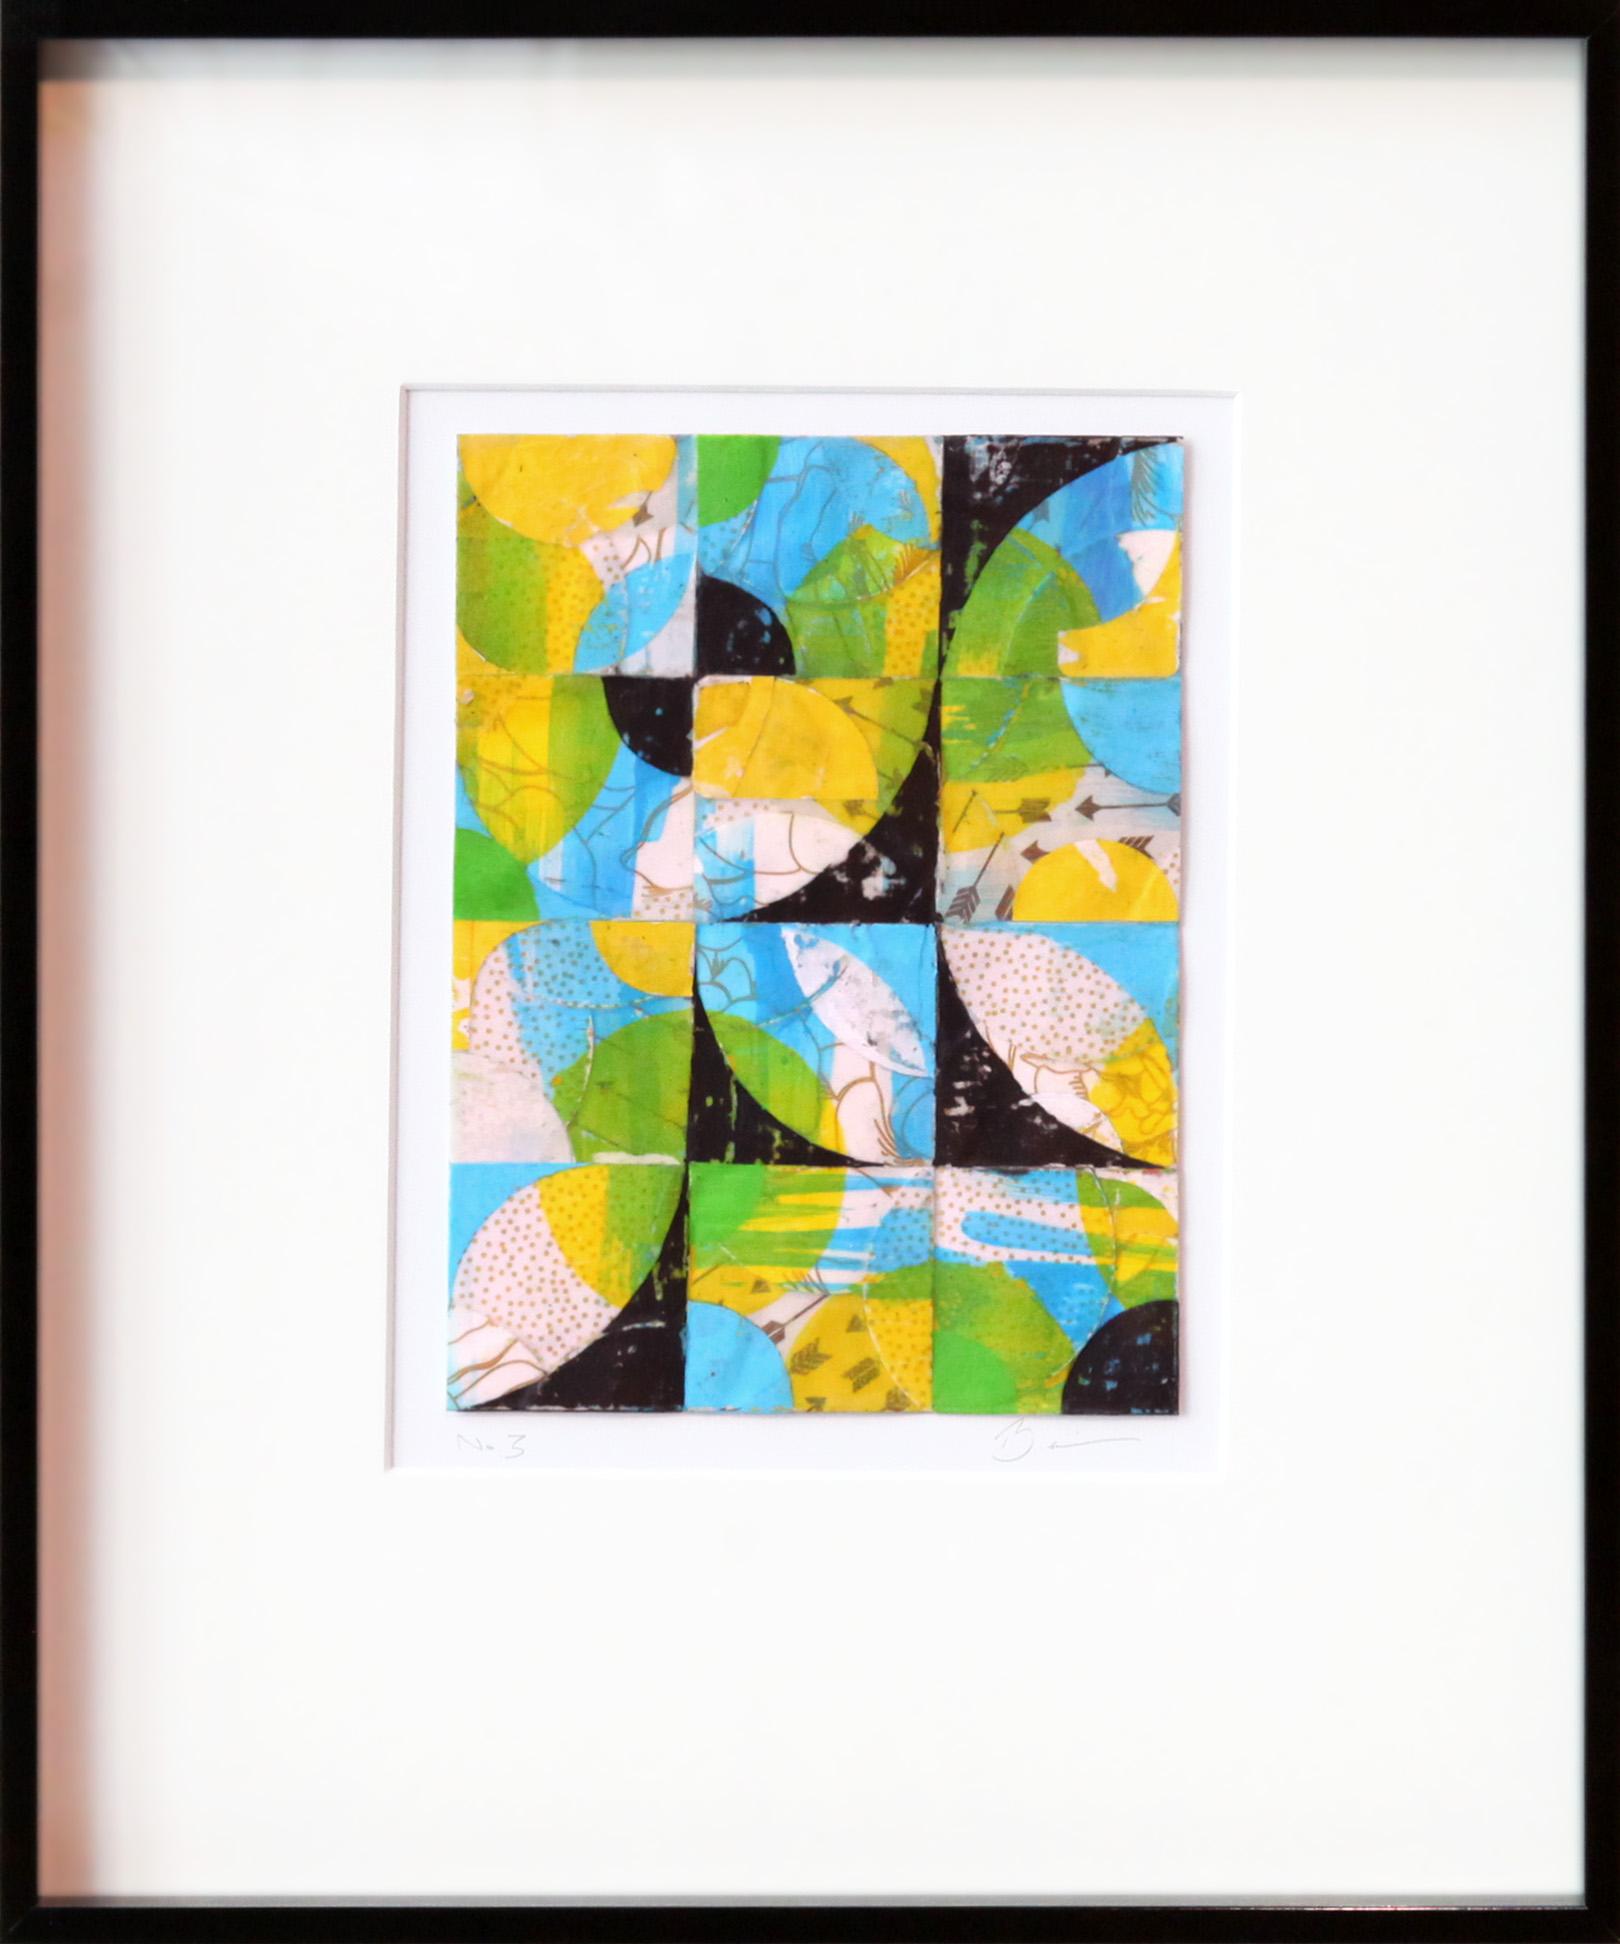 This is an original abstract acrylic paint and collage artwork by San Diego artist, Bryce Nihill. Its dimensions are 13.5" x 15.6 "x 1.4". It comes framed. A certificate of authenticity will follow delivery. 

Intrigued by the concepts set forth in